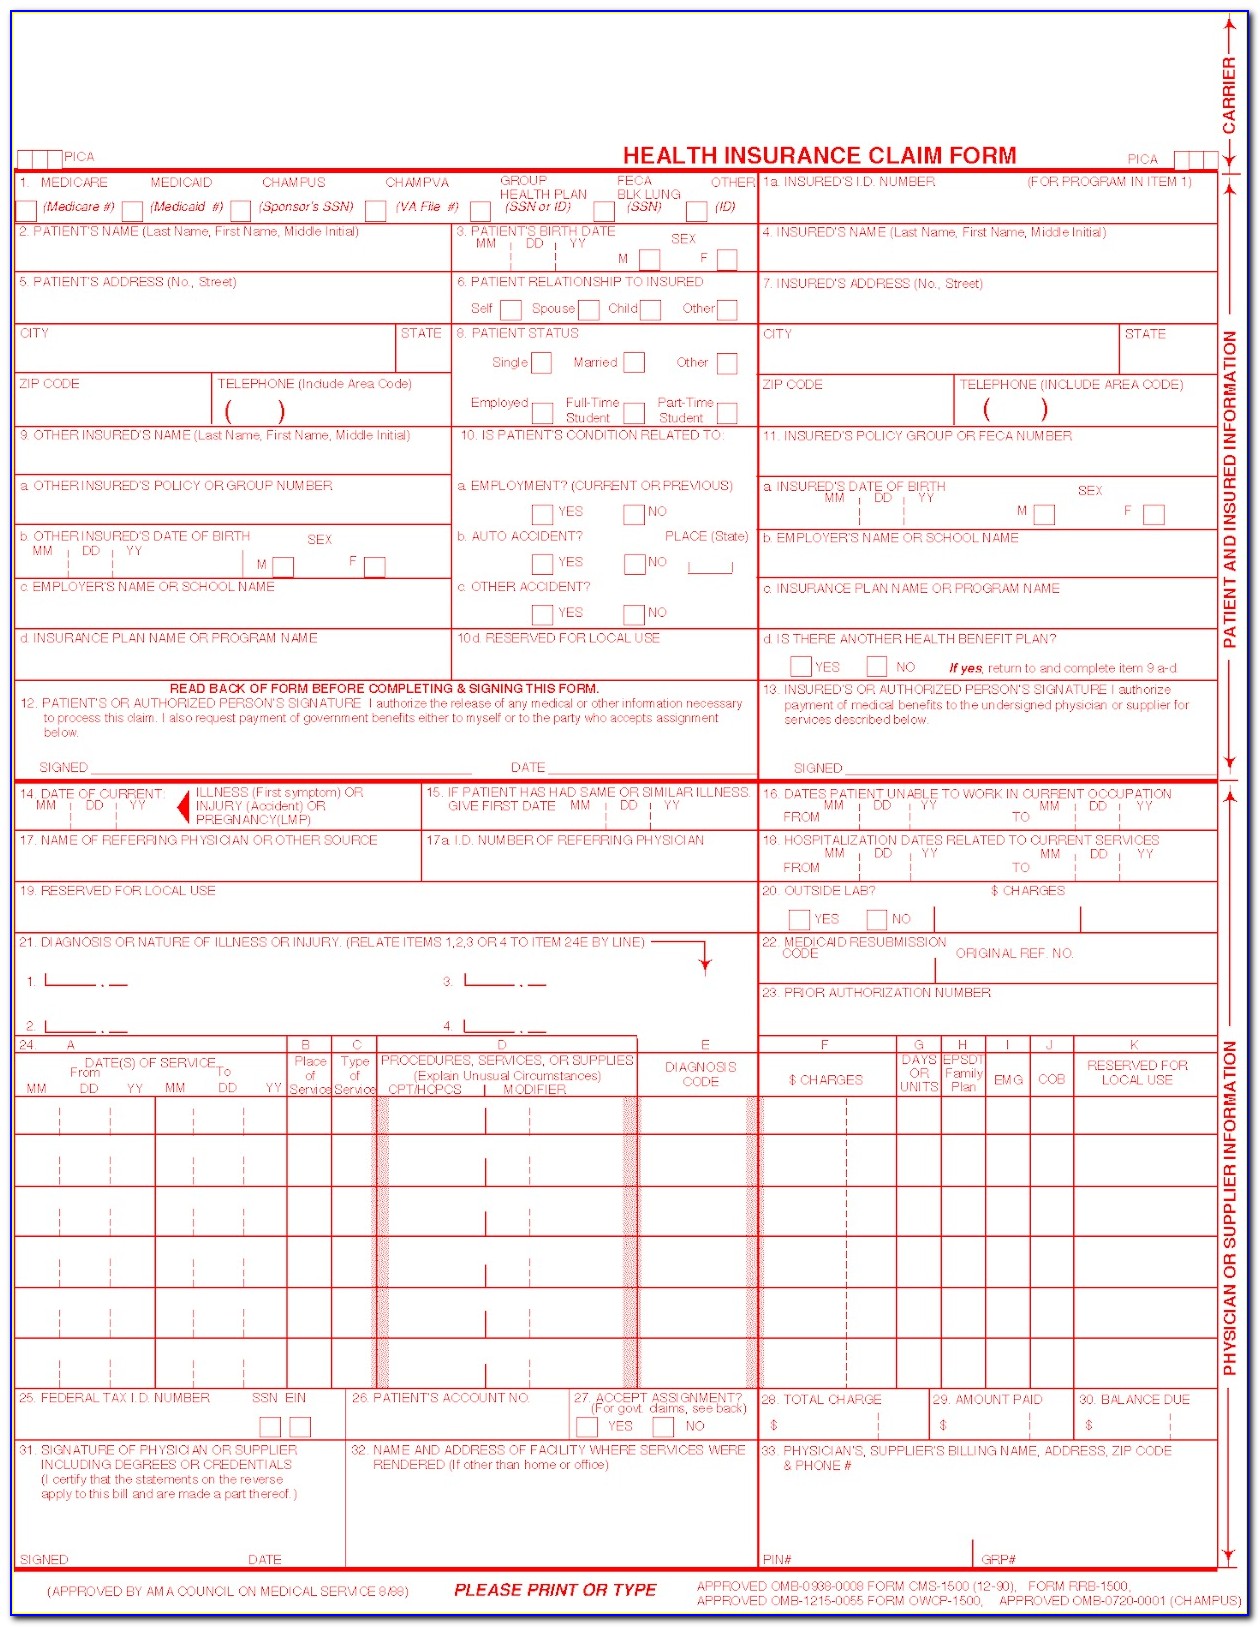 Health Insurance Claim Form 1500 Fillable Download